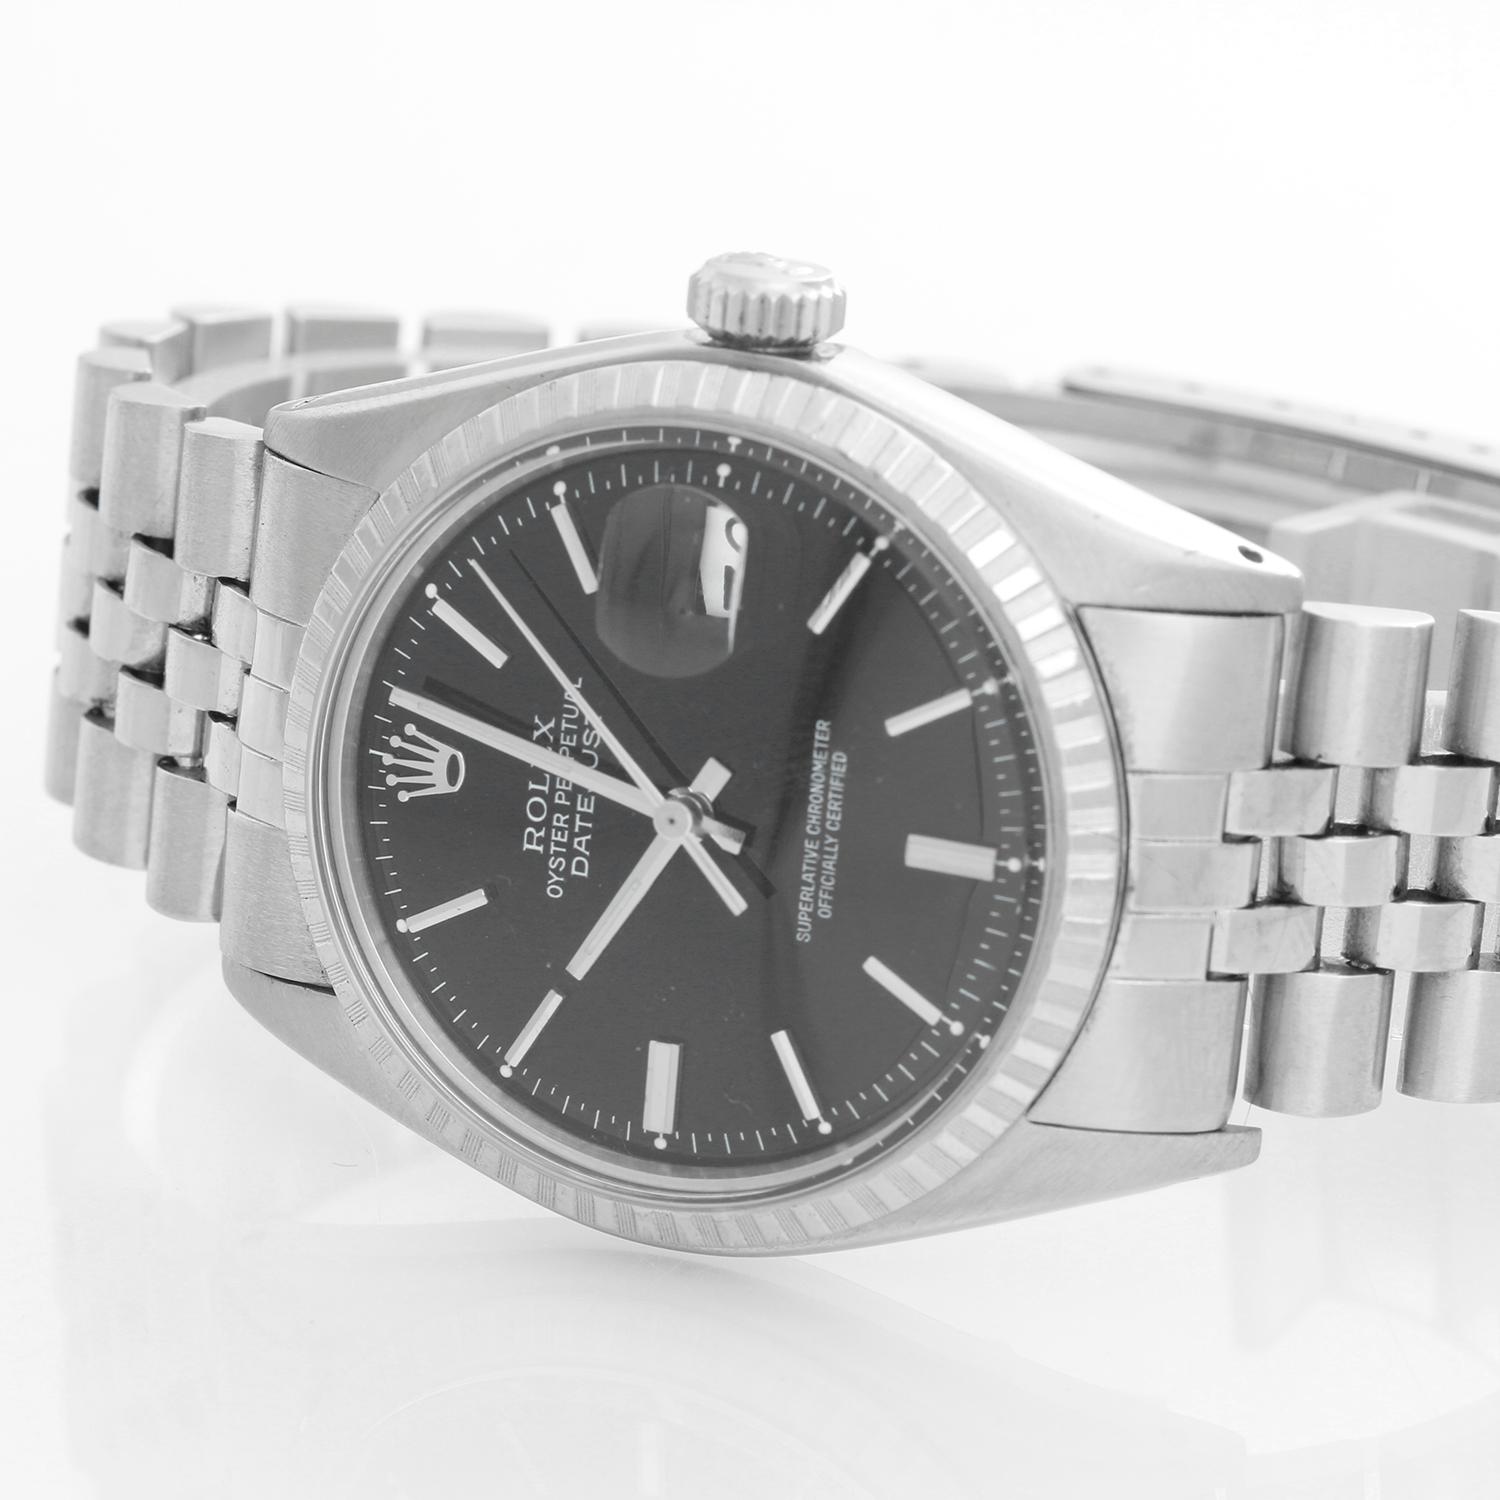 Men's Rolex Datejust Stainless Steel Watch 1601 - Automatic winding,. Stainless steel case with engine turned bezel ( 36 mm ) . Black dial with stick hour markers. Stainless steel jubilee bracelet . Pre-owned wtih box and books. 